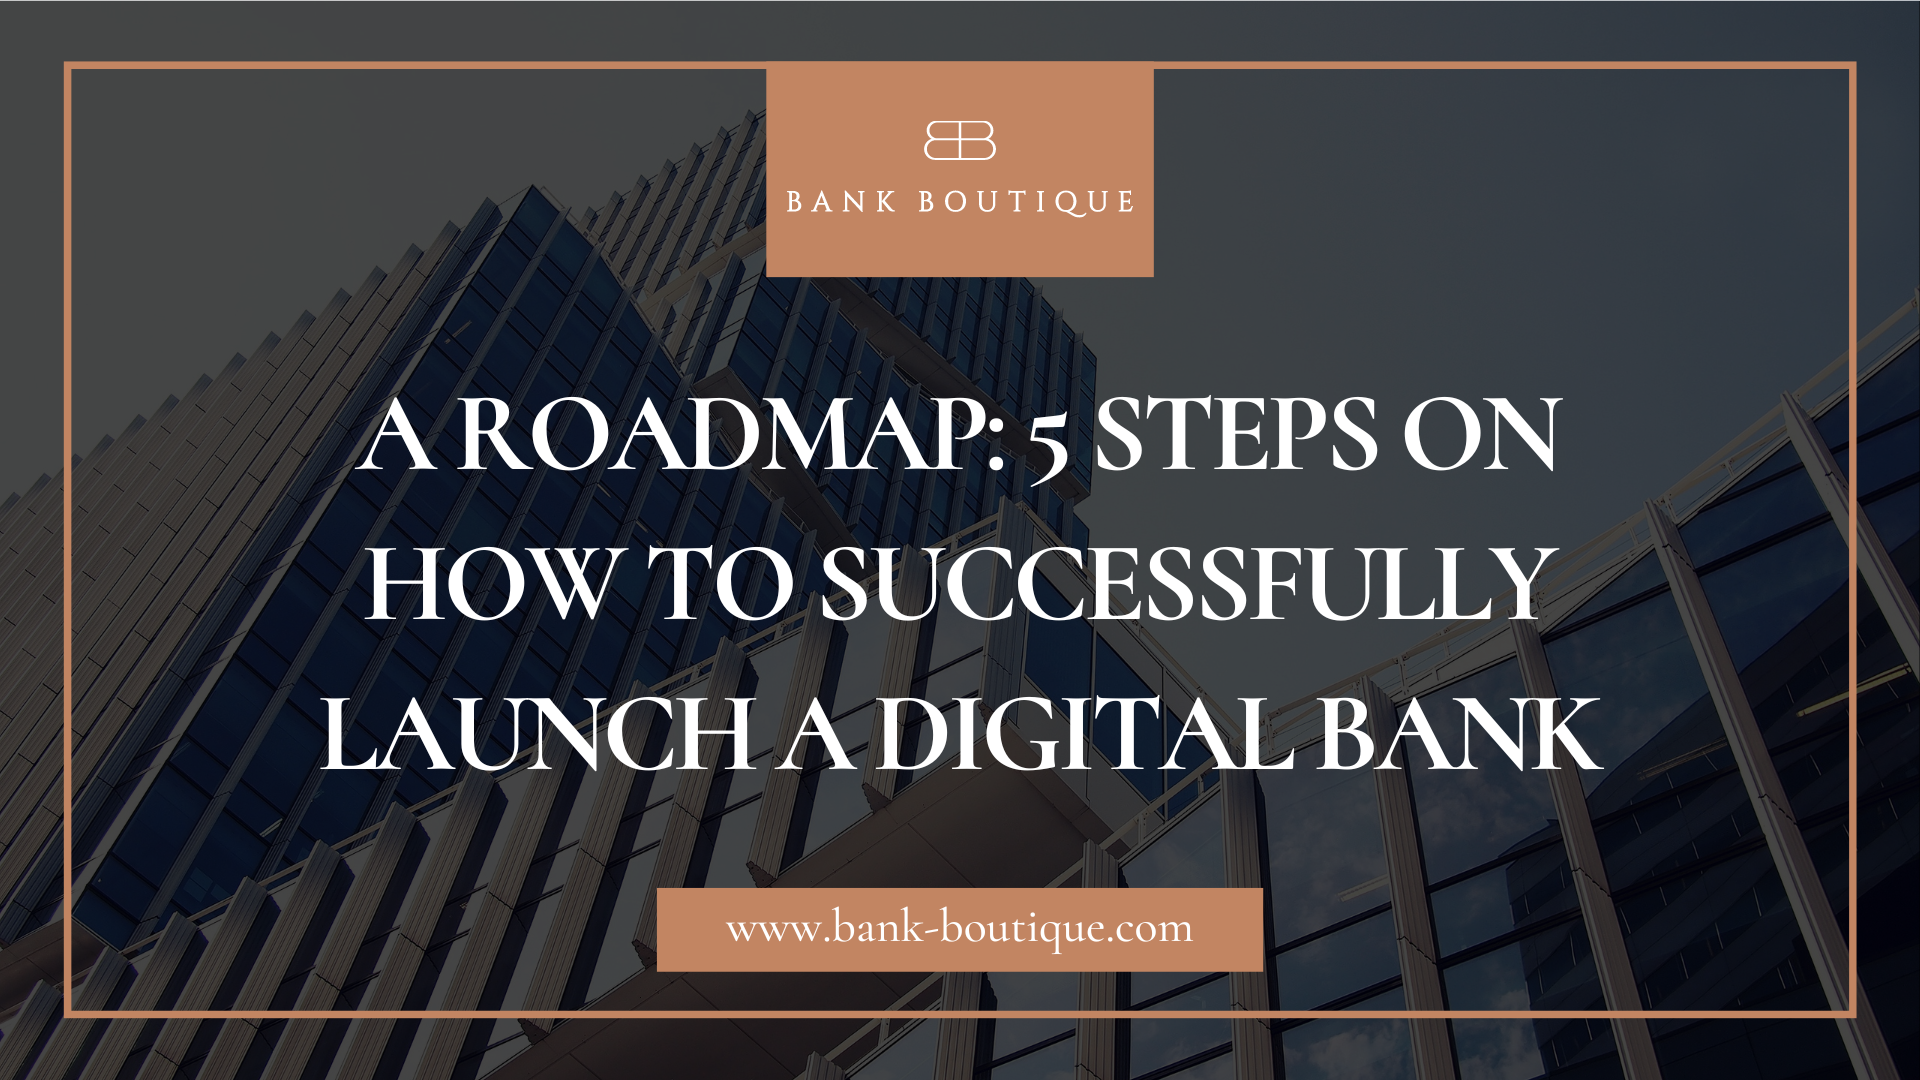 A Roadmap: 5 Steps on How to Successfully Launch a Digital Bank